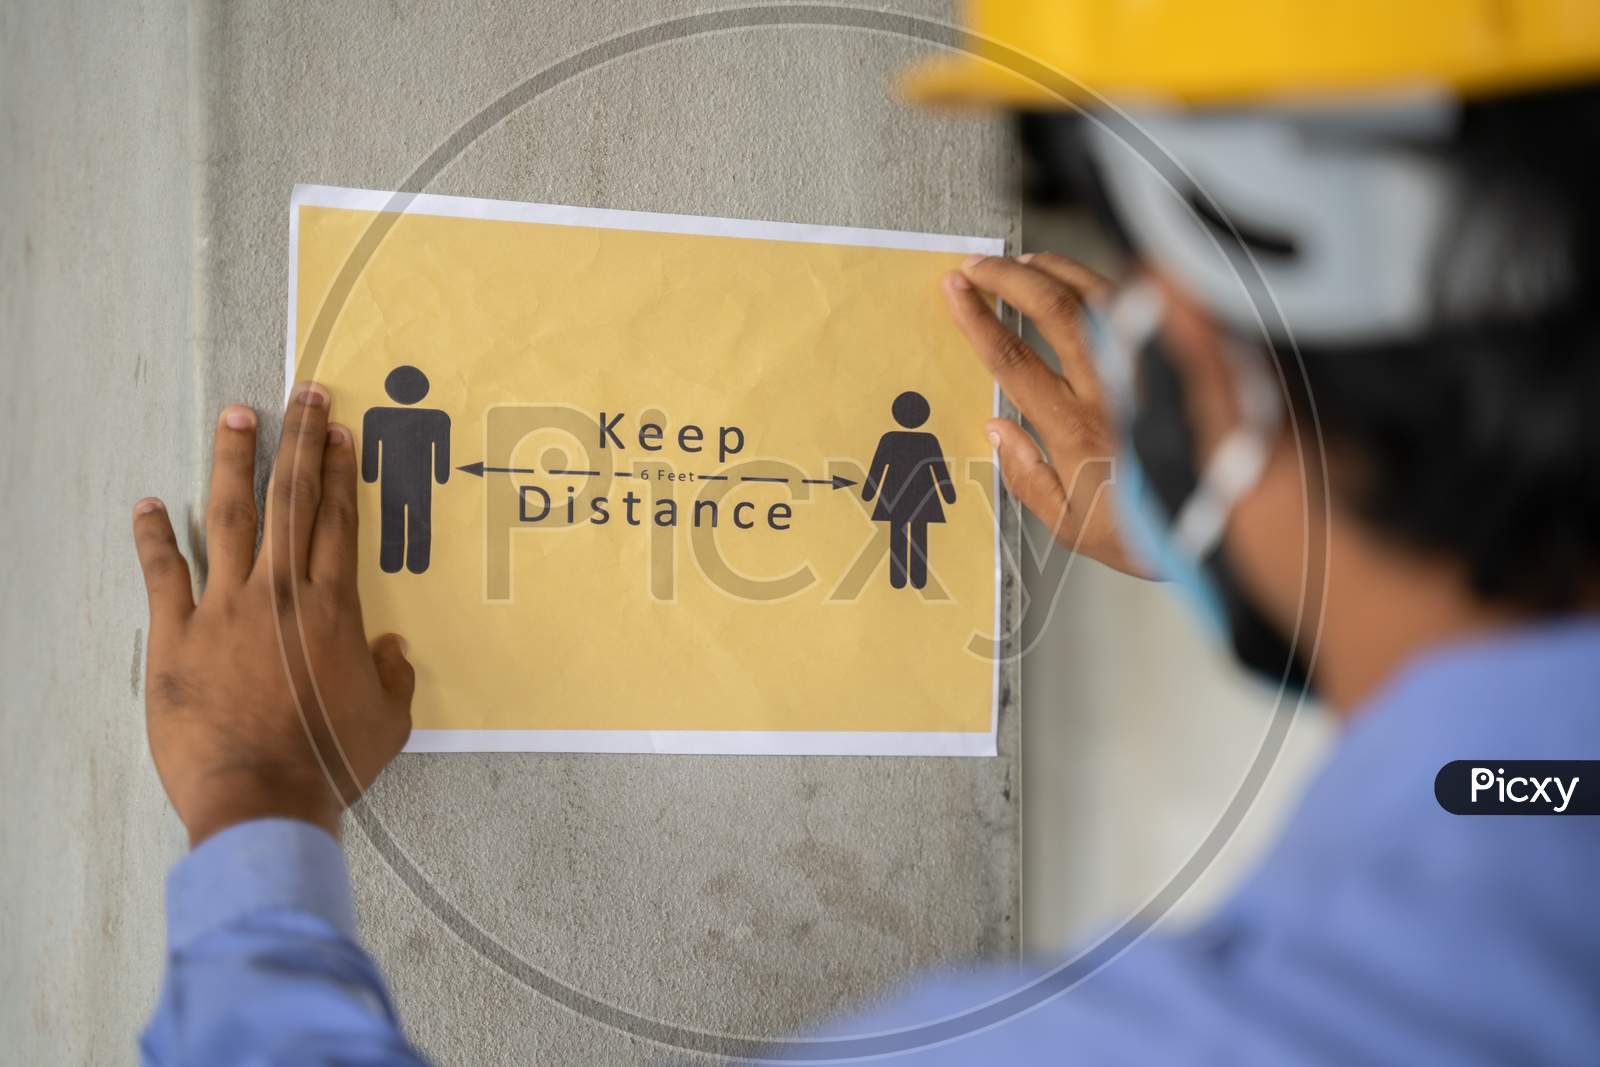 Worker Pasting Keep 6 Feet Distance On Wall At Work Place Or Construction Site Due To Coronavirus Or Covid-19 Pandemic - Concept Of Safety Measures, Back To Work, New Normal And Protection.